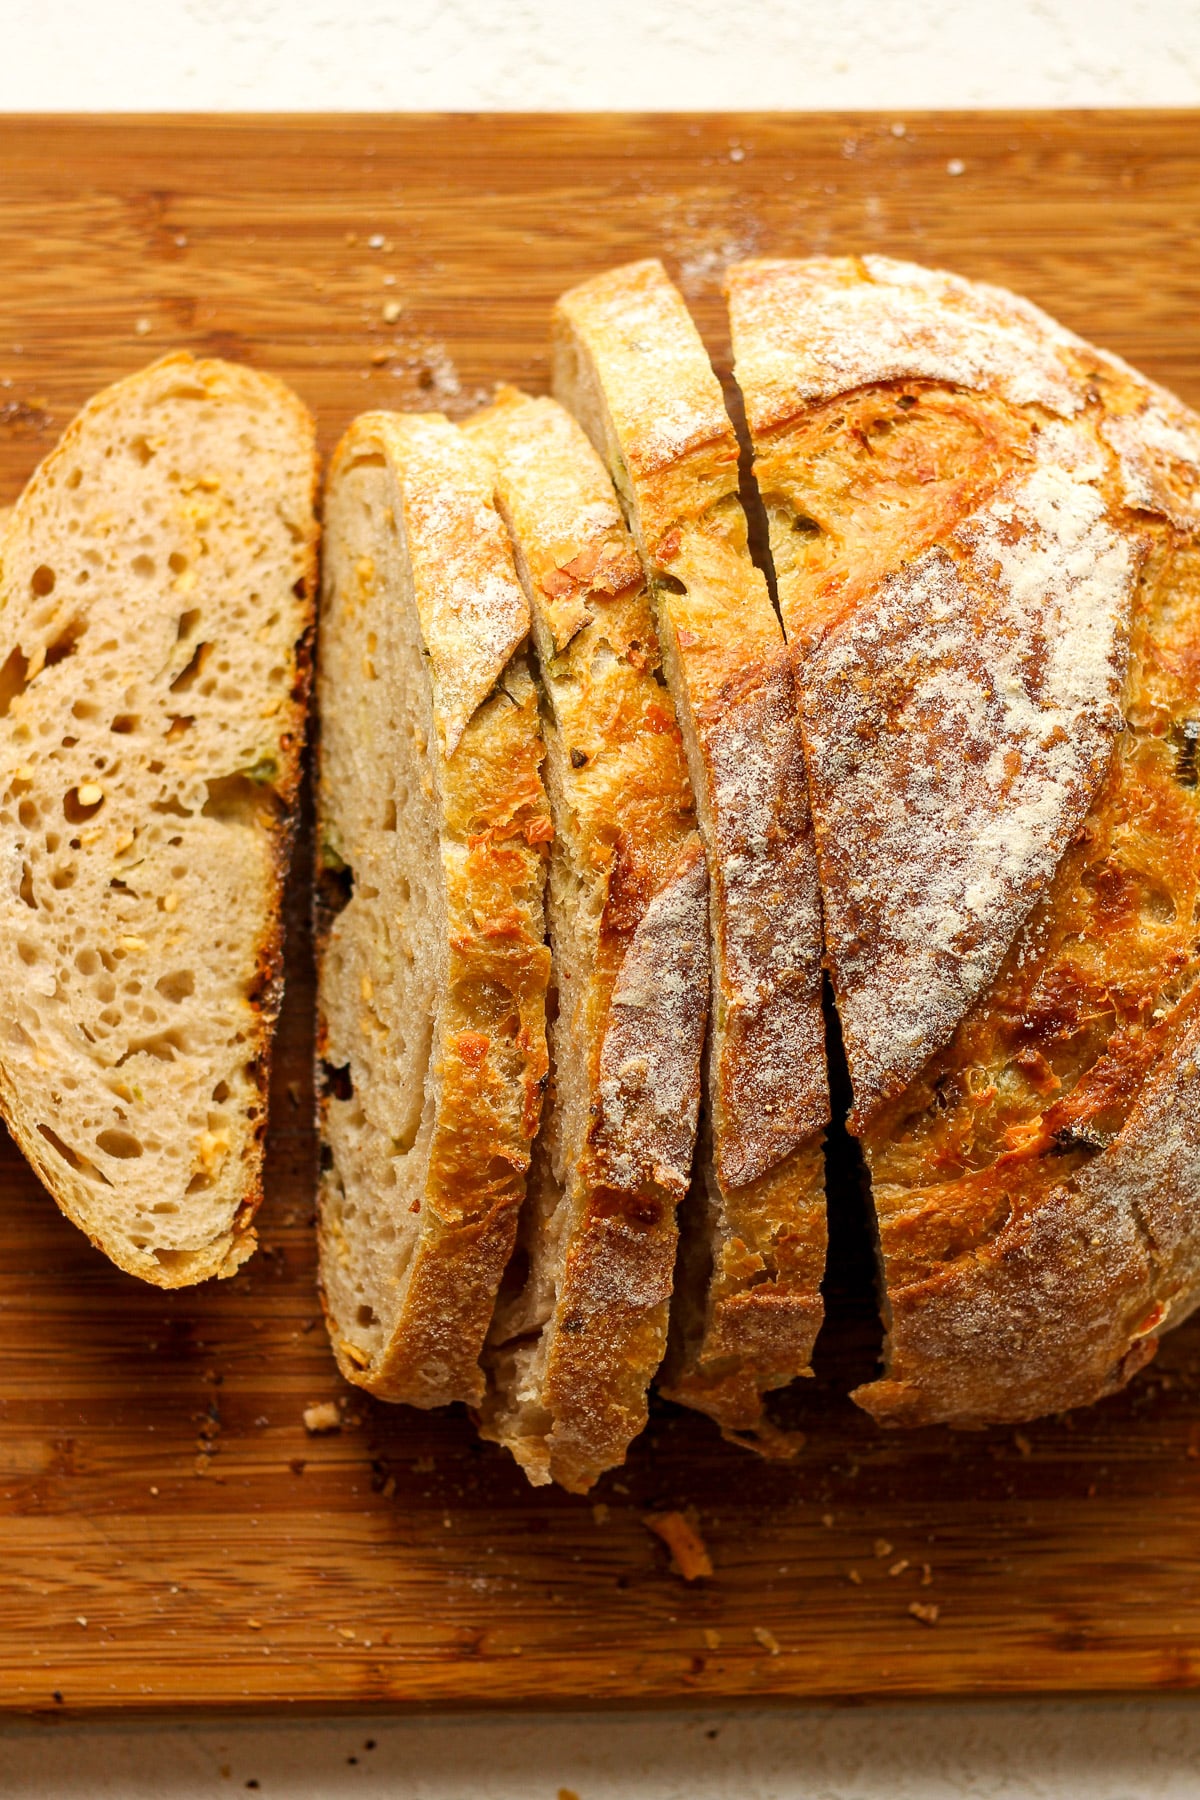 A board of jalapeño cheddar sourdough bread with some sliced.